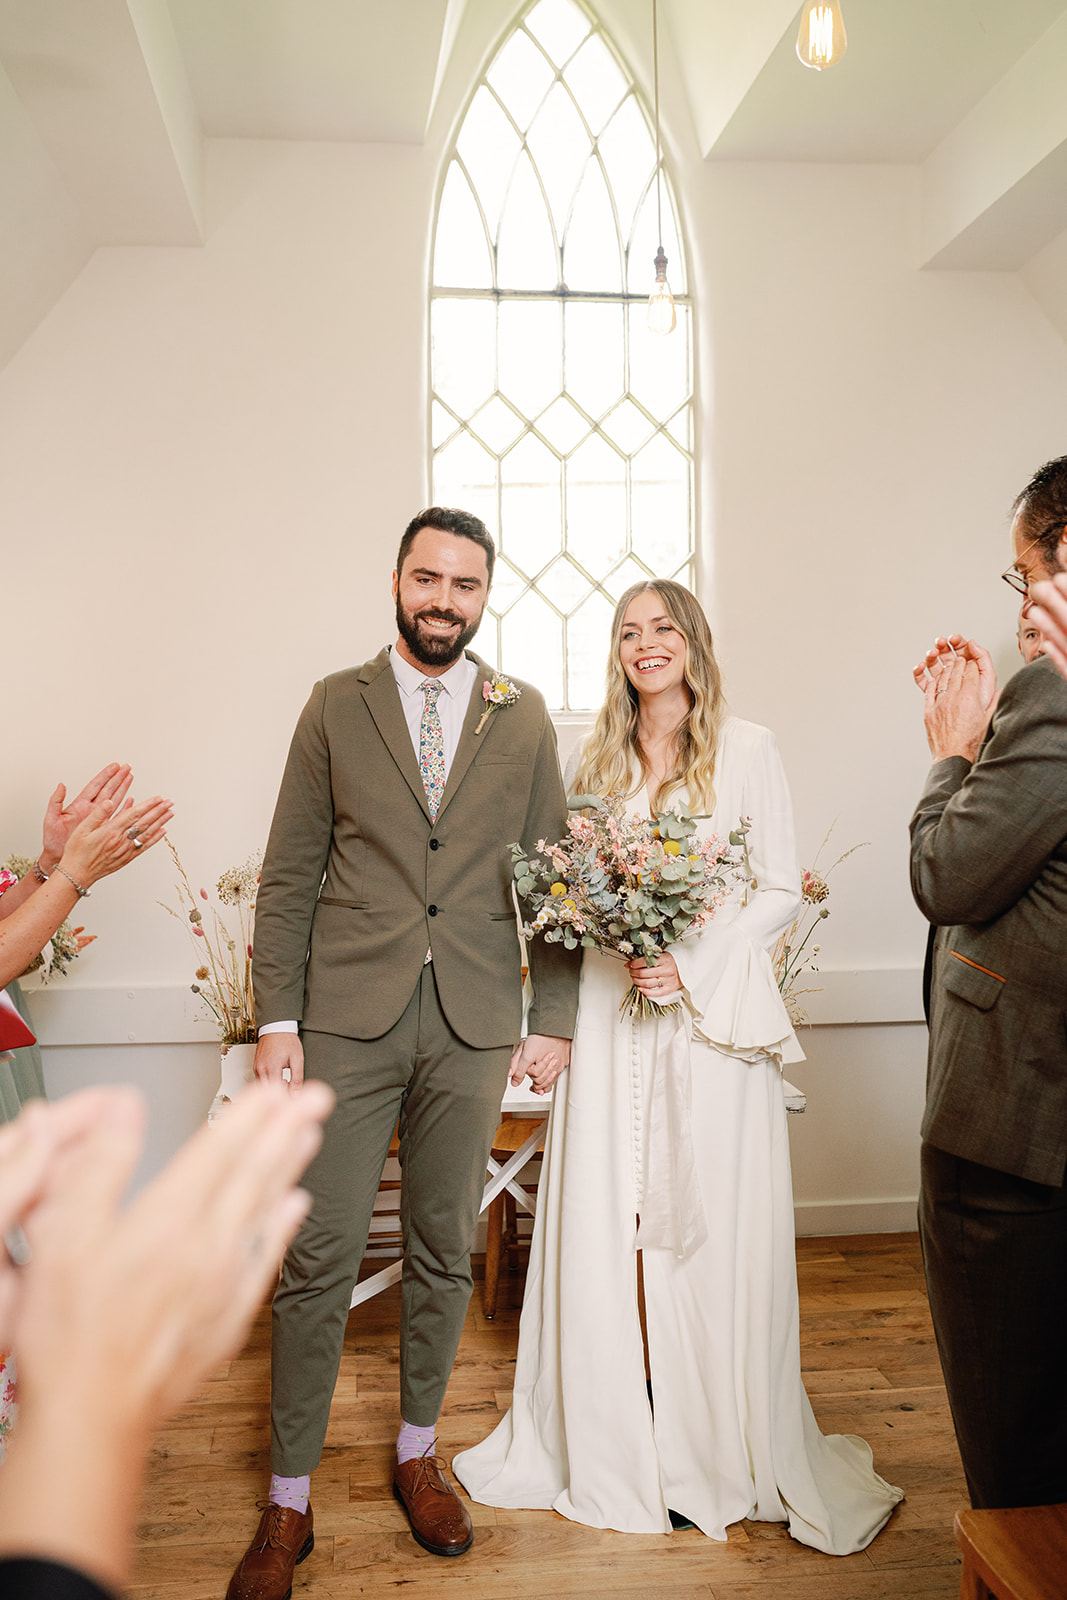 Couples family applaud after their small wedding ceremony